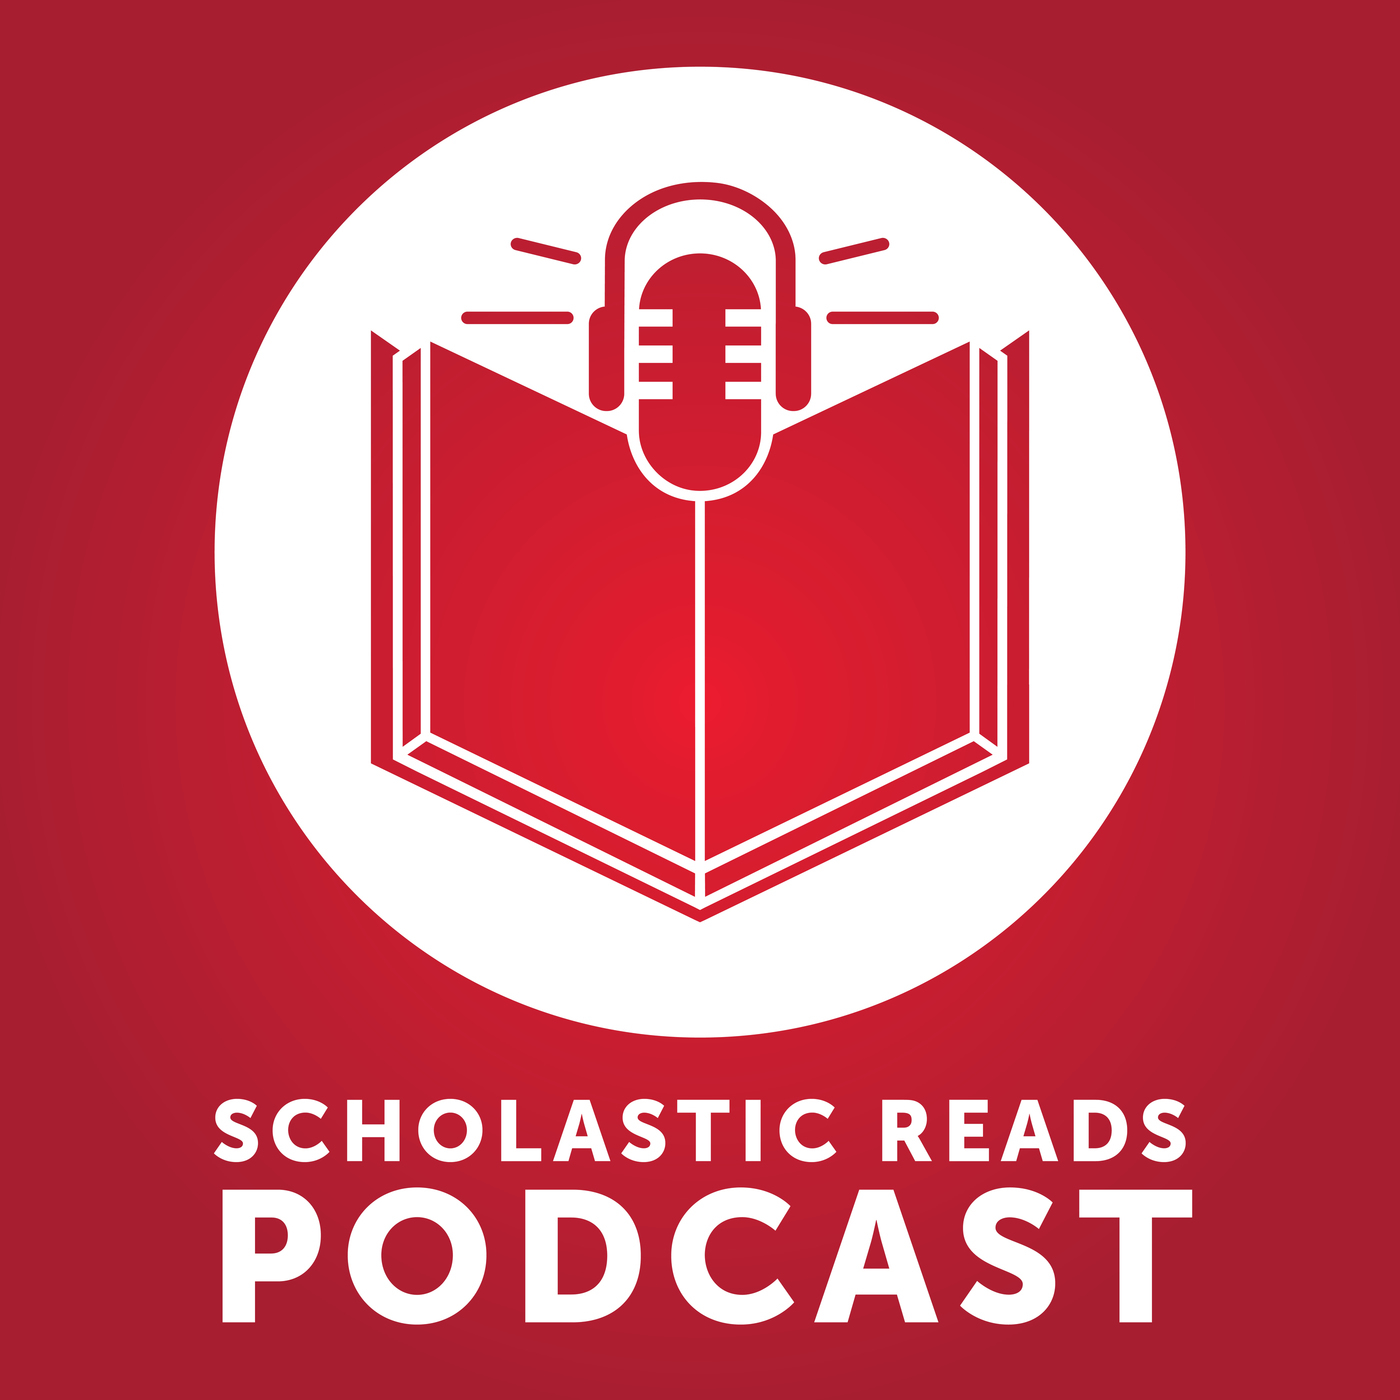 The Scholastic Reads Podcast